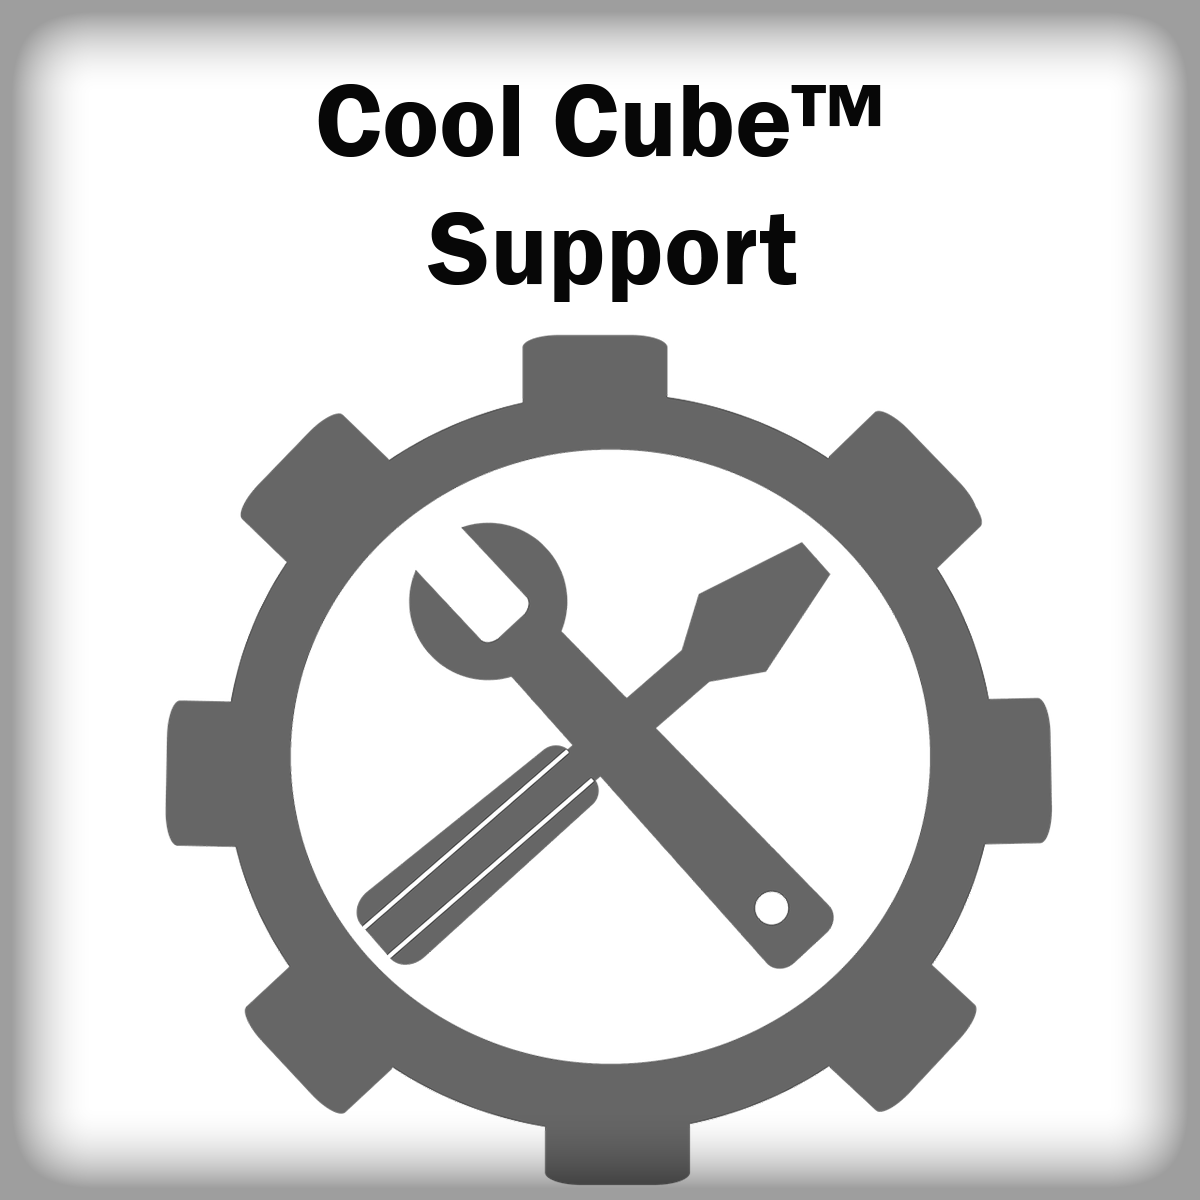 https://www.vericormed.com/wp-content/uploads/2021/07/cool-cube-support.png